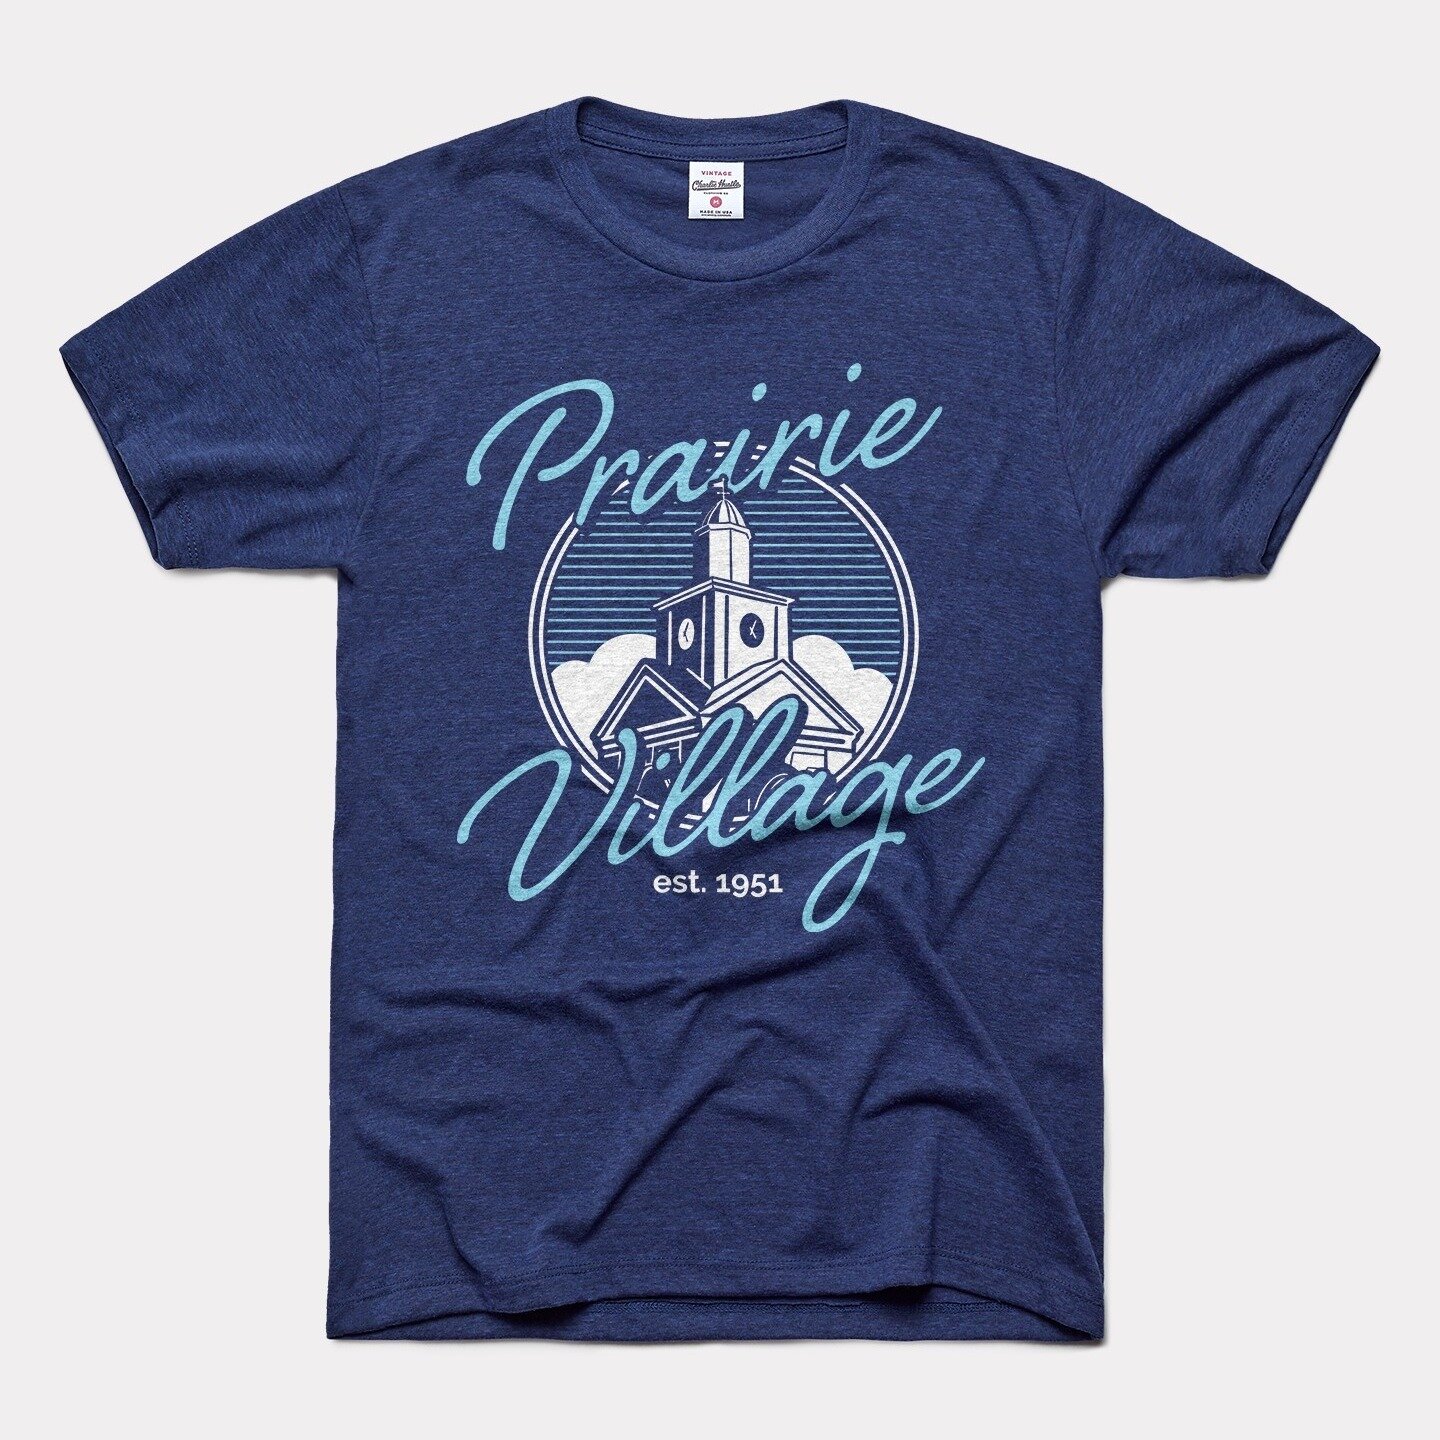 Be sure to purchase exclusive @prairievillageartshow merchandise! 

Exclusive @charliehustleco X Prairie Village shirts in vintage white or heather navy will be on sale for $30 at the Information Booth near the clock tower. 

The following items will